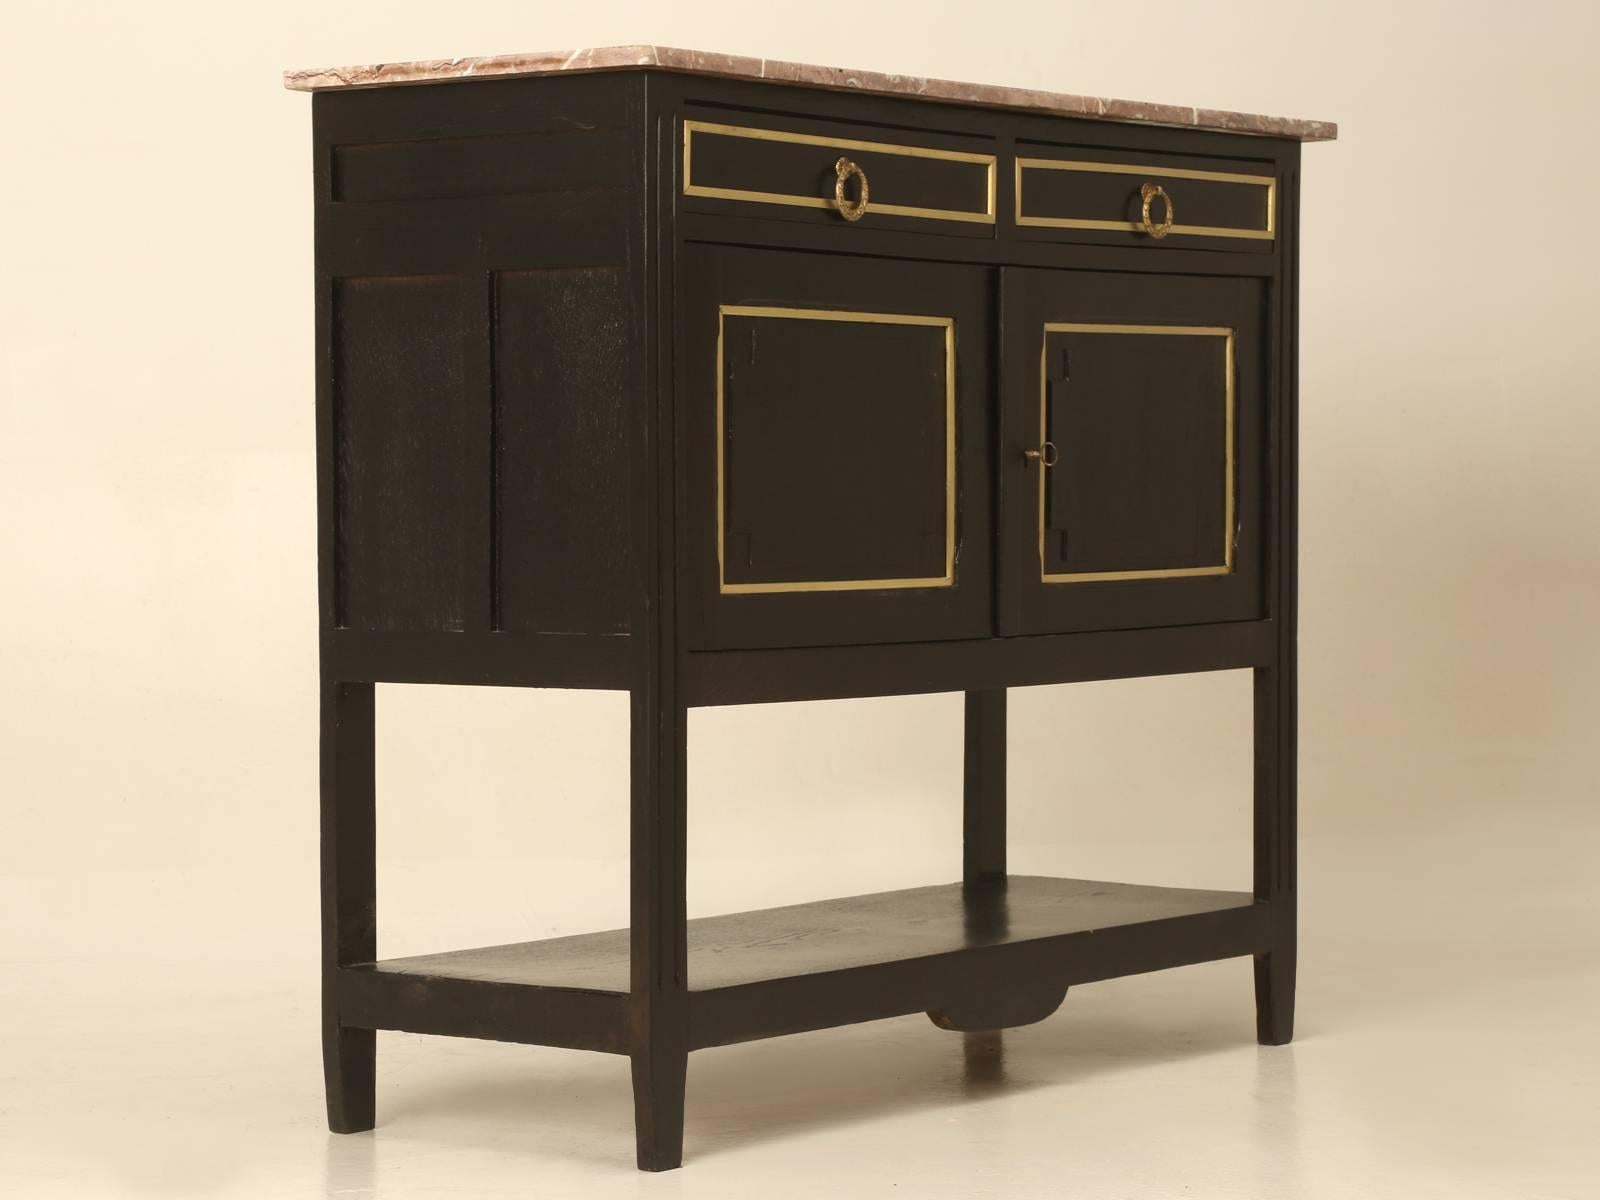 French Louis XVI style Ebonized small two-door Server or French Ebonized Buffet, with a lower shelf and marble top. Our Old Plank finishing department just completed a very nice ebonized finish, so there are no scratches to worry about and there are